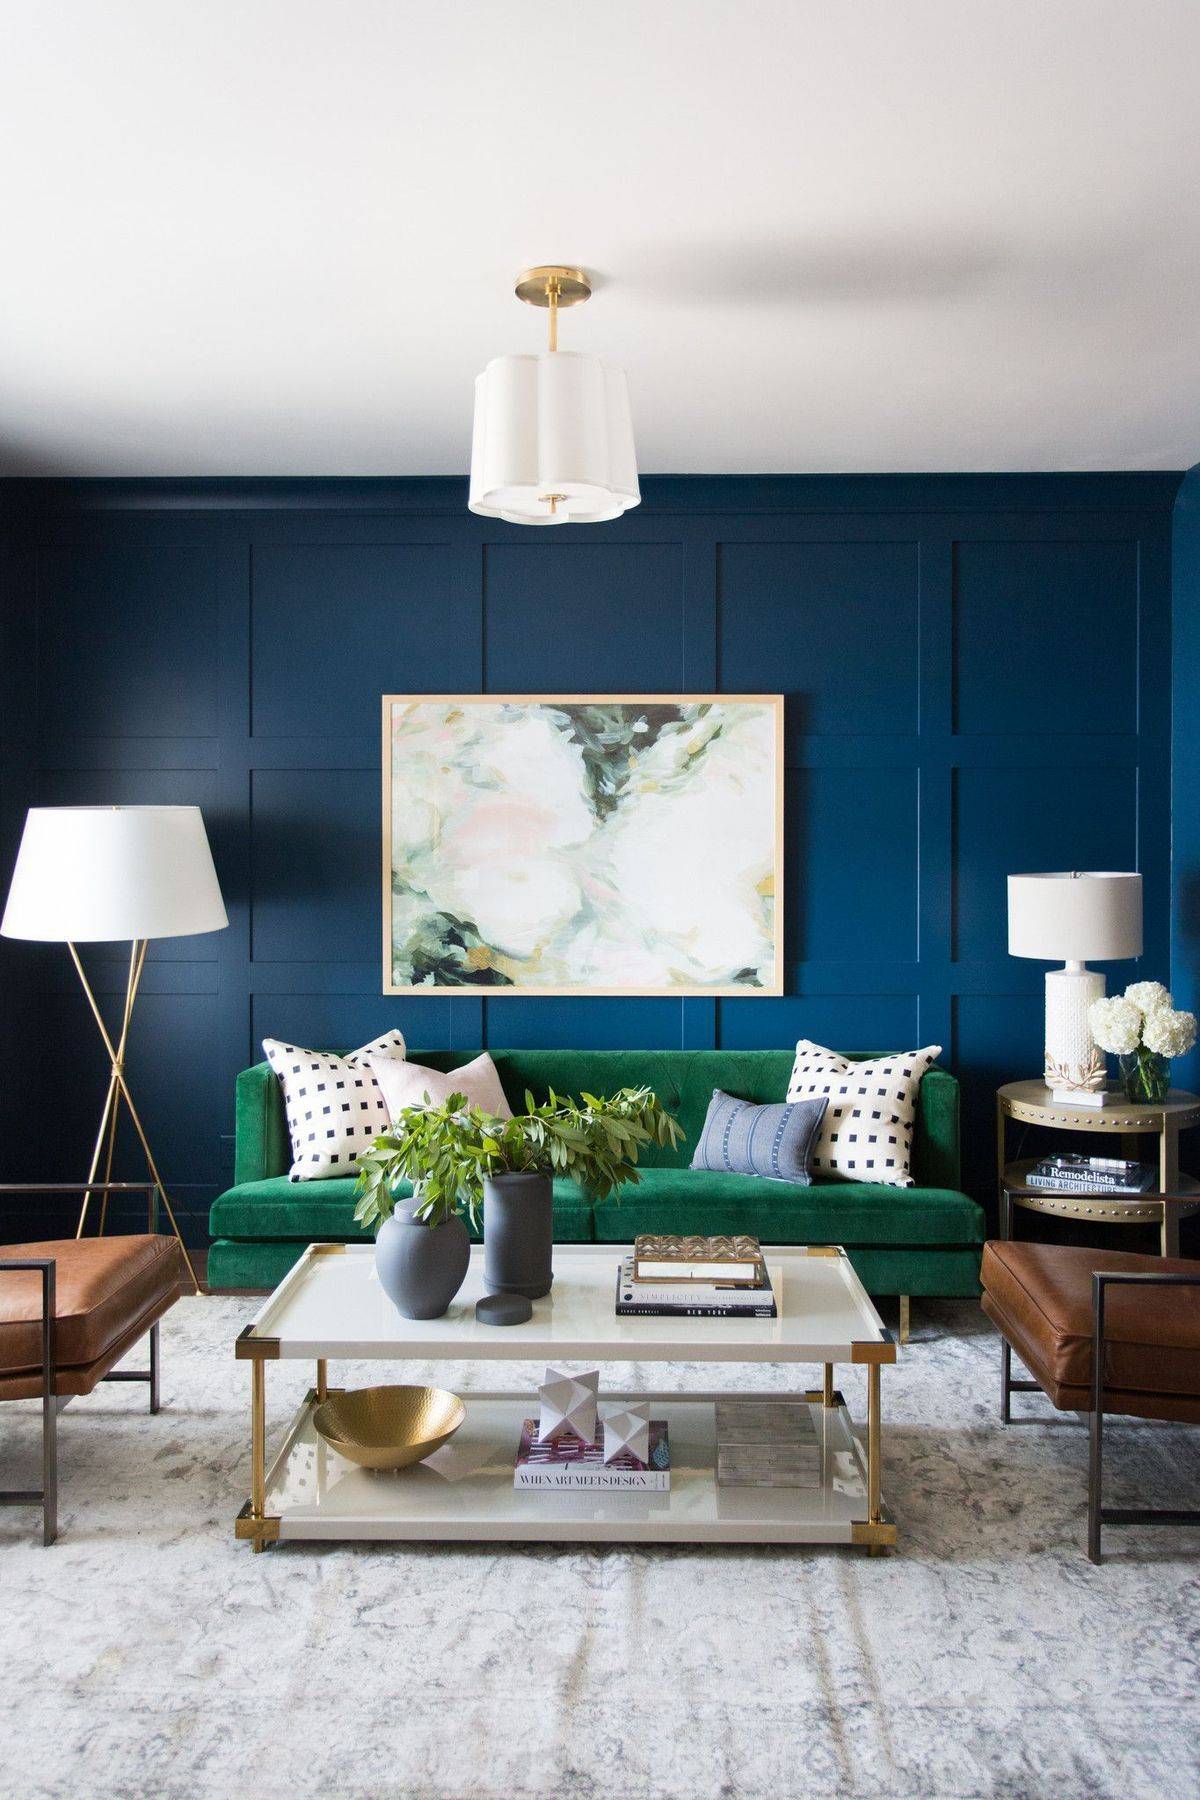 Stunning teal board and batten wall as an accent (from Studio McGee)